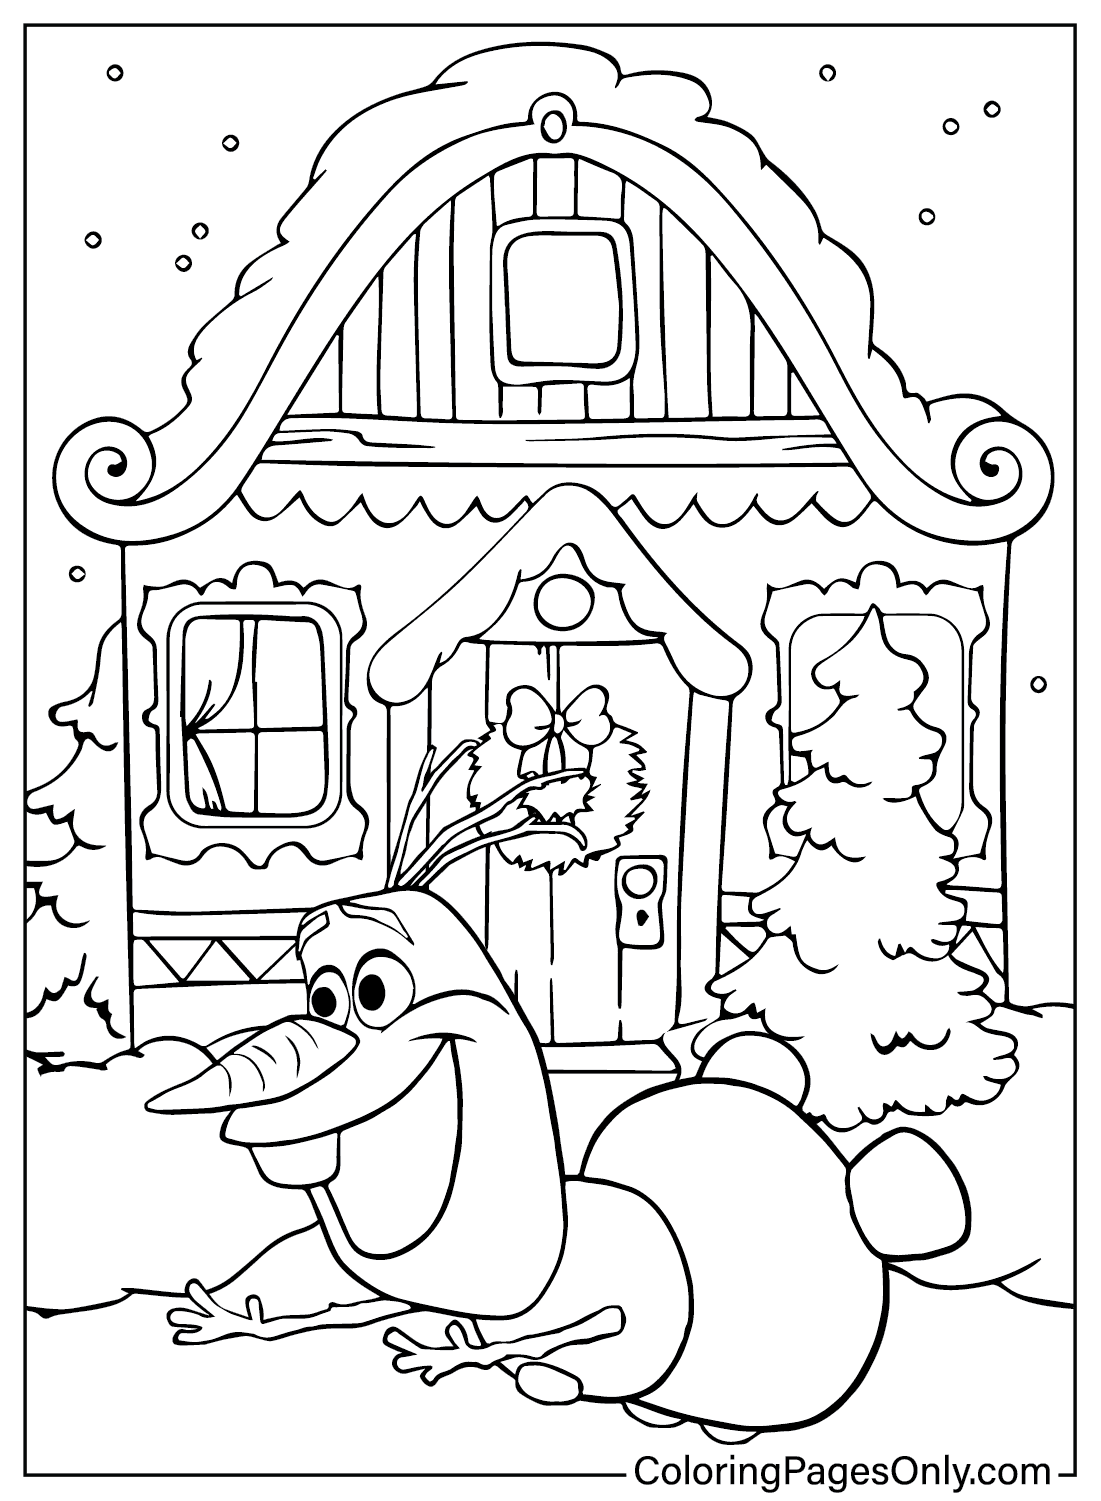 Snowman And Gingerbread House Coloring Page